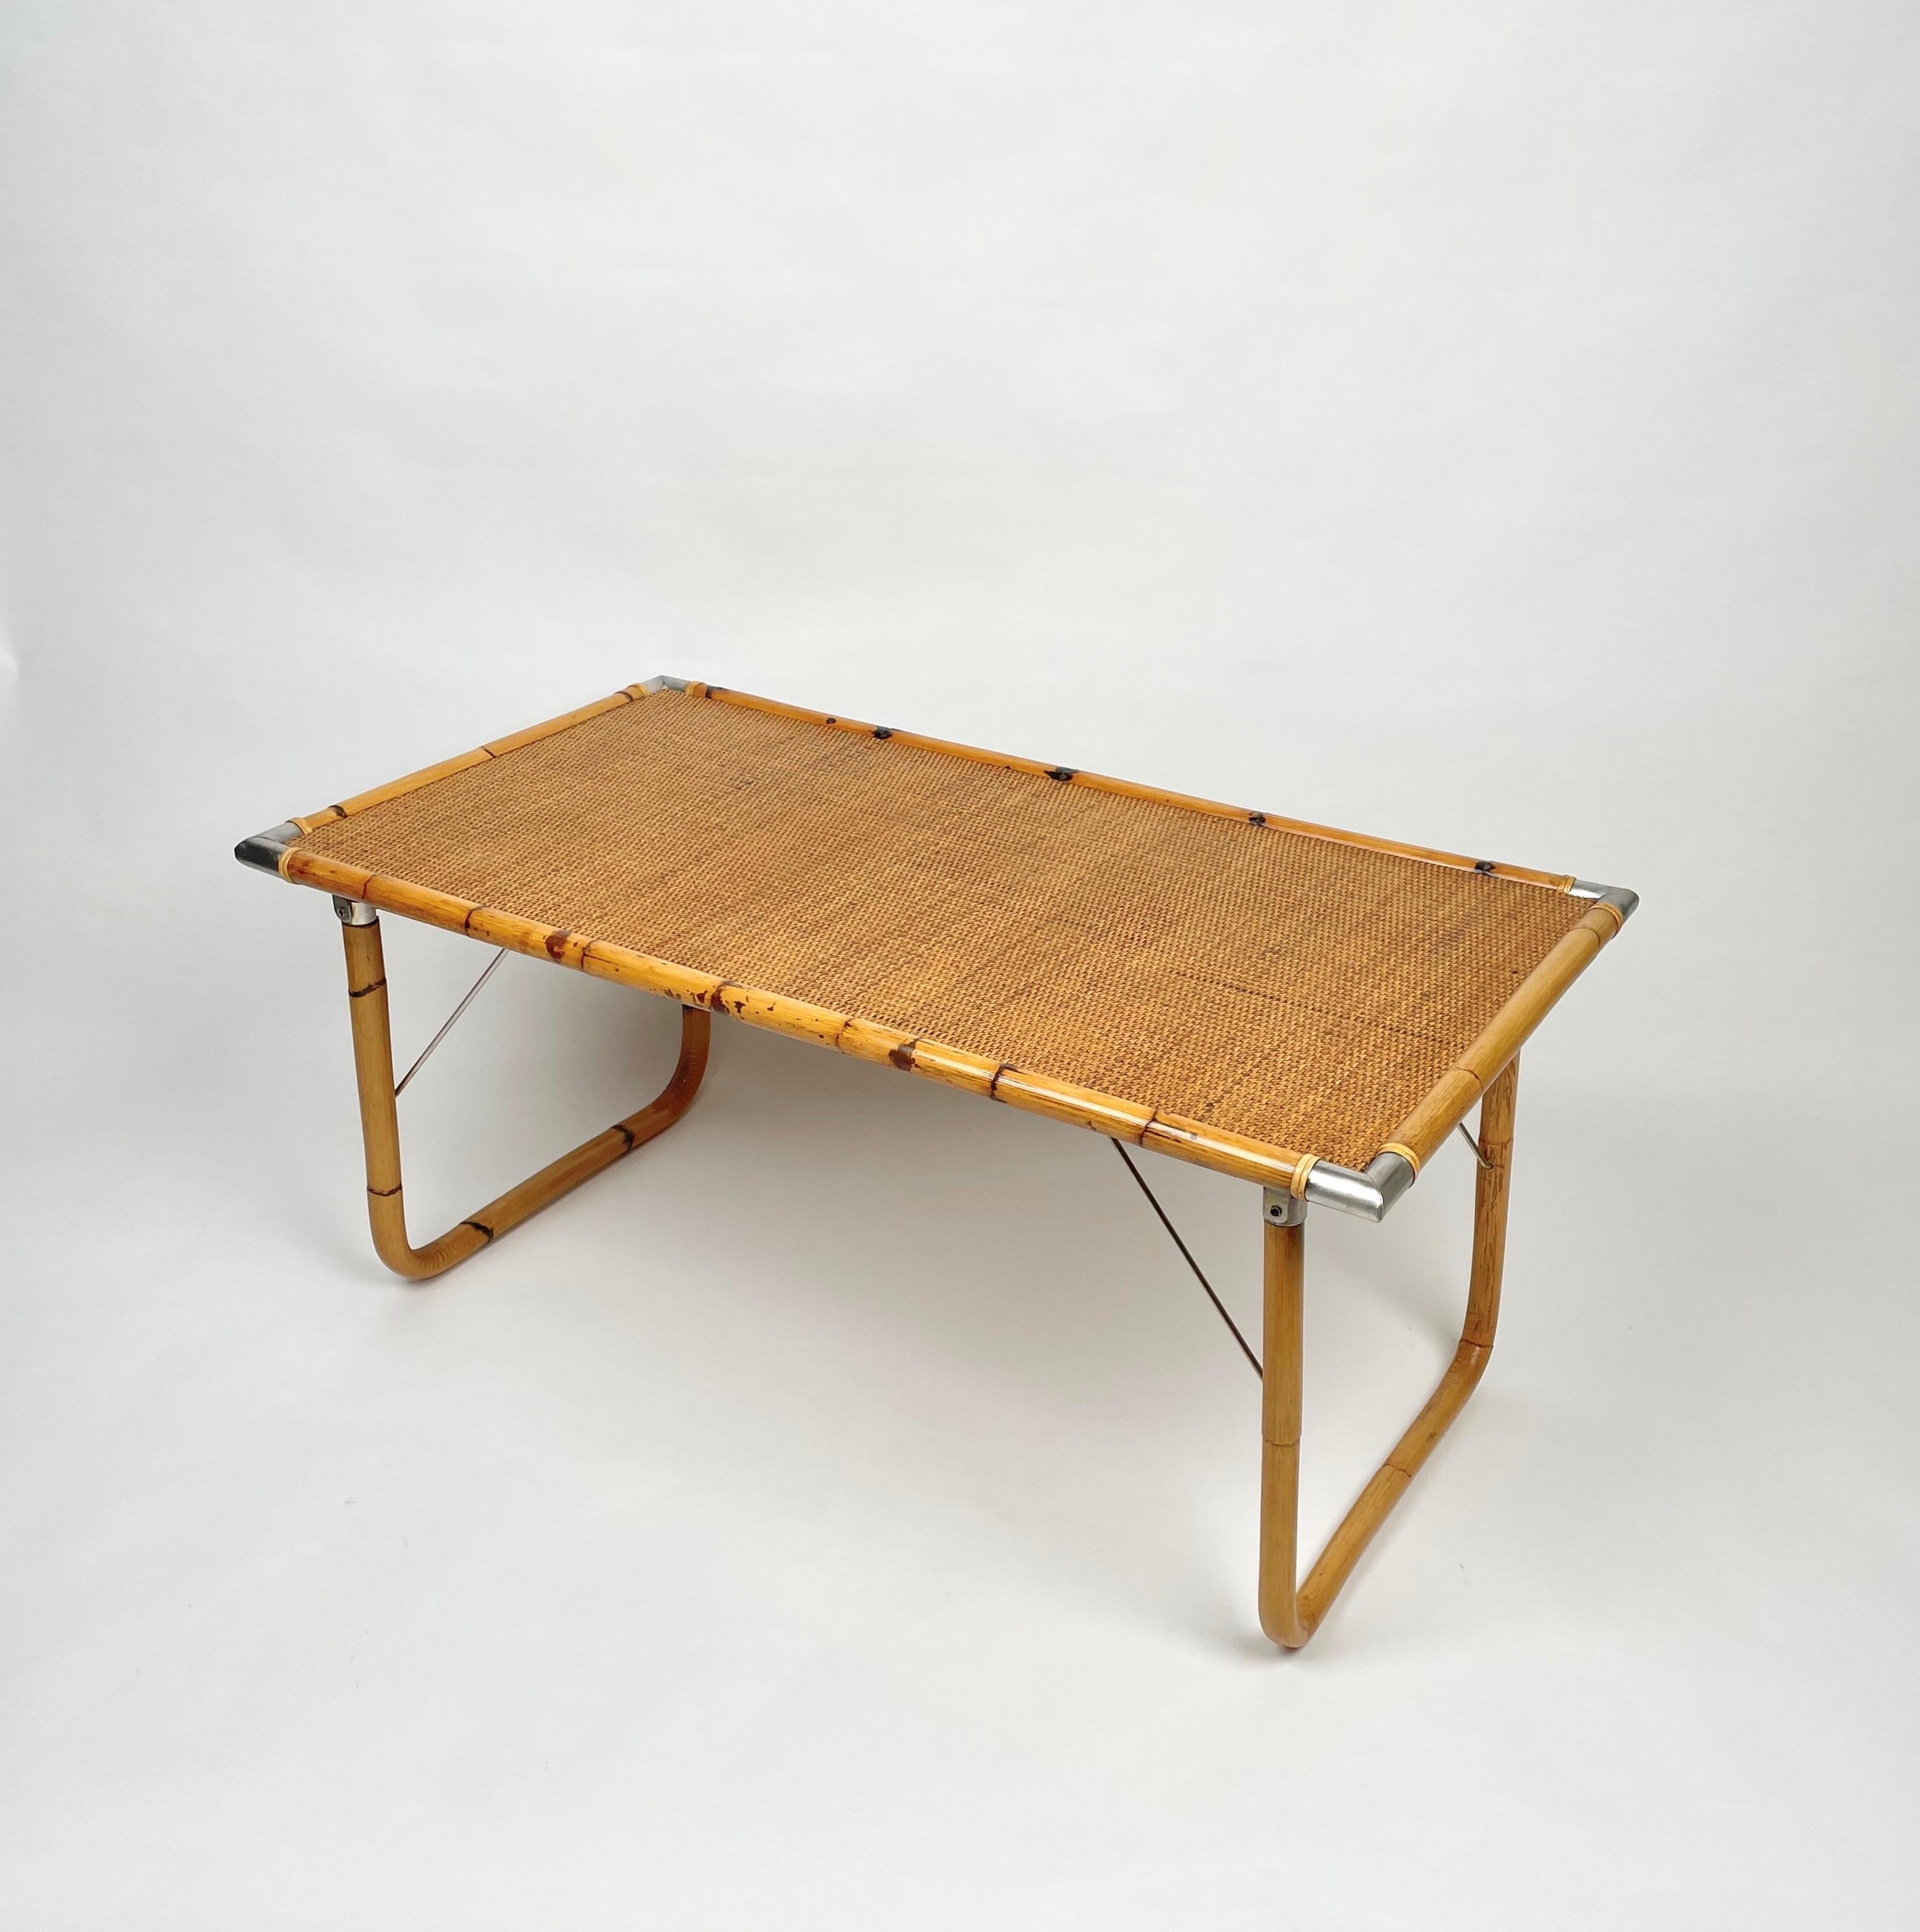 Folding Coffee Table in Bamboo, Rattan, Wicker and Steel Corner, Italy, 1970s For Sale 1